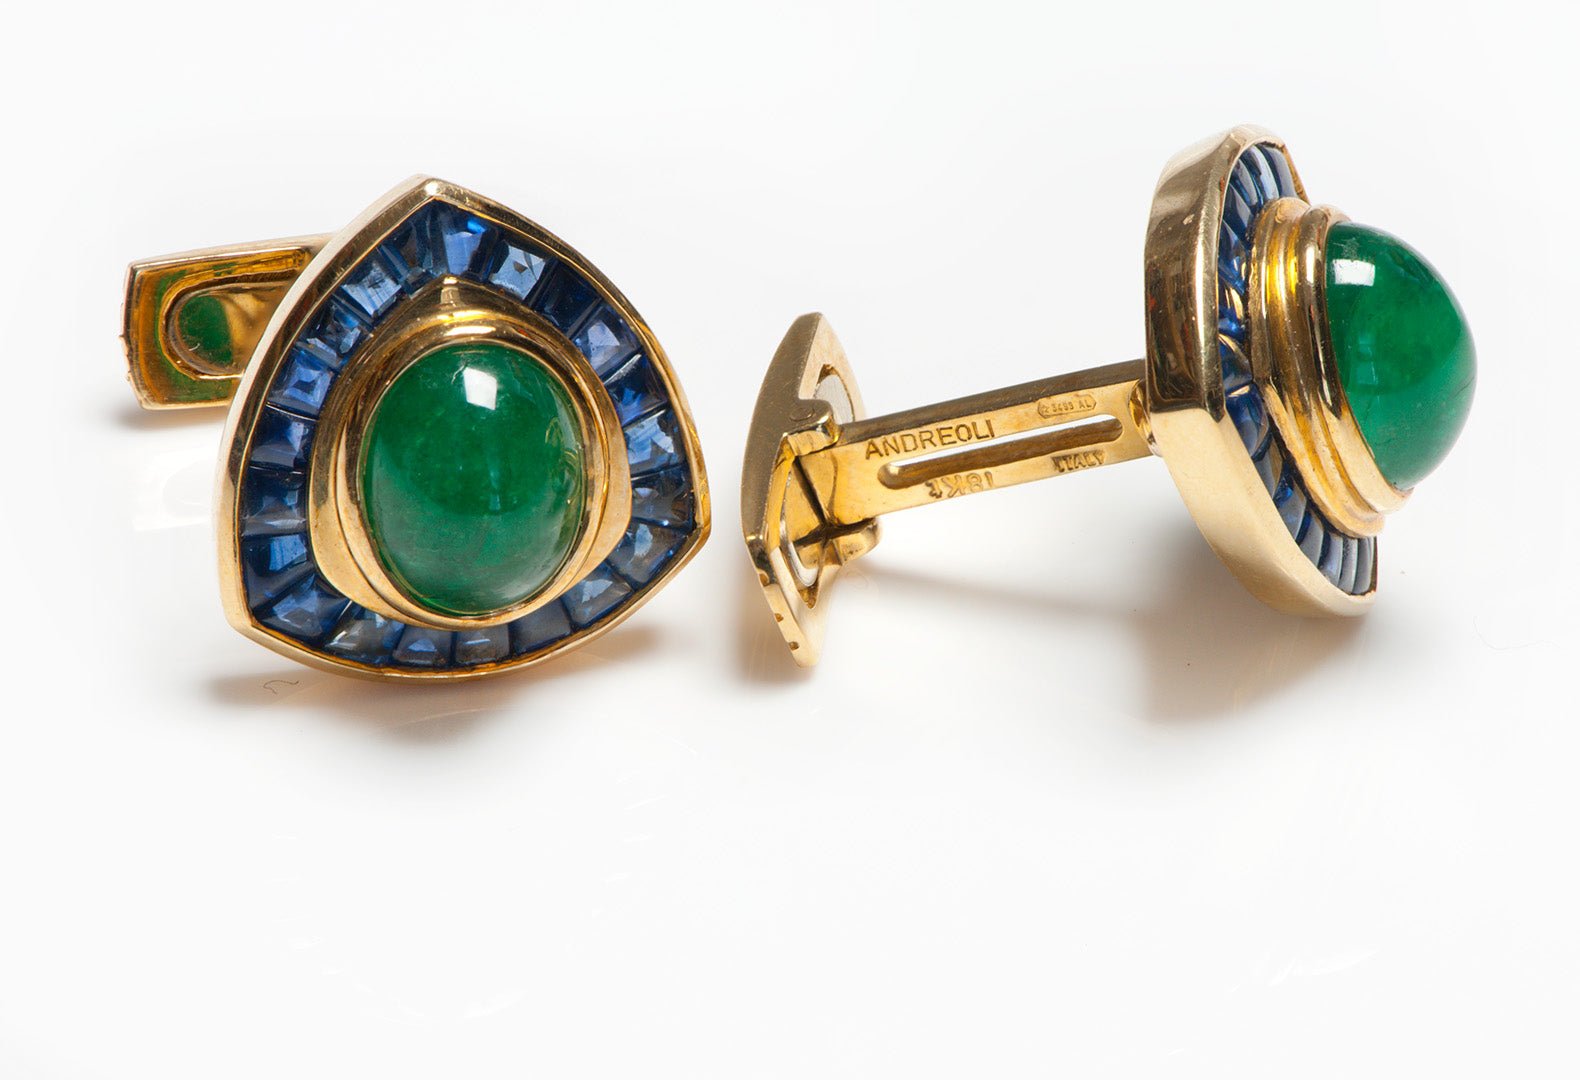 Andreoli 18K Gold Emerald Sapphire Cufflinks - DSF Antique Jewelry